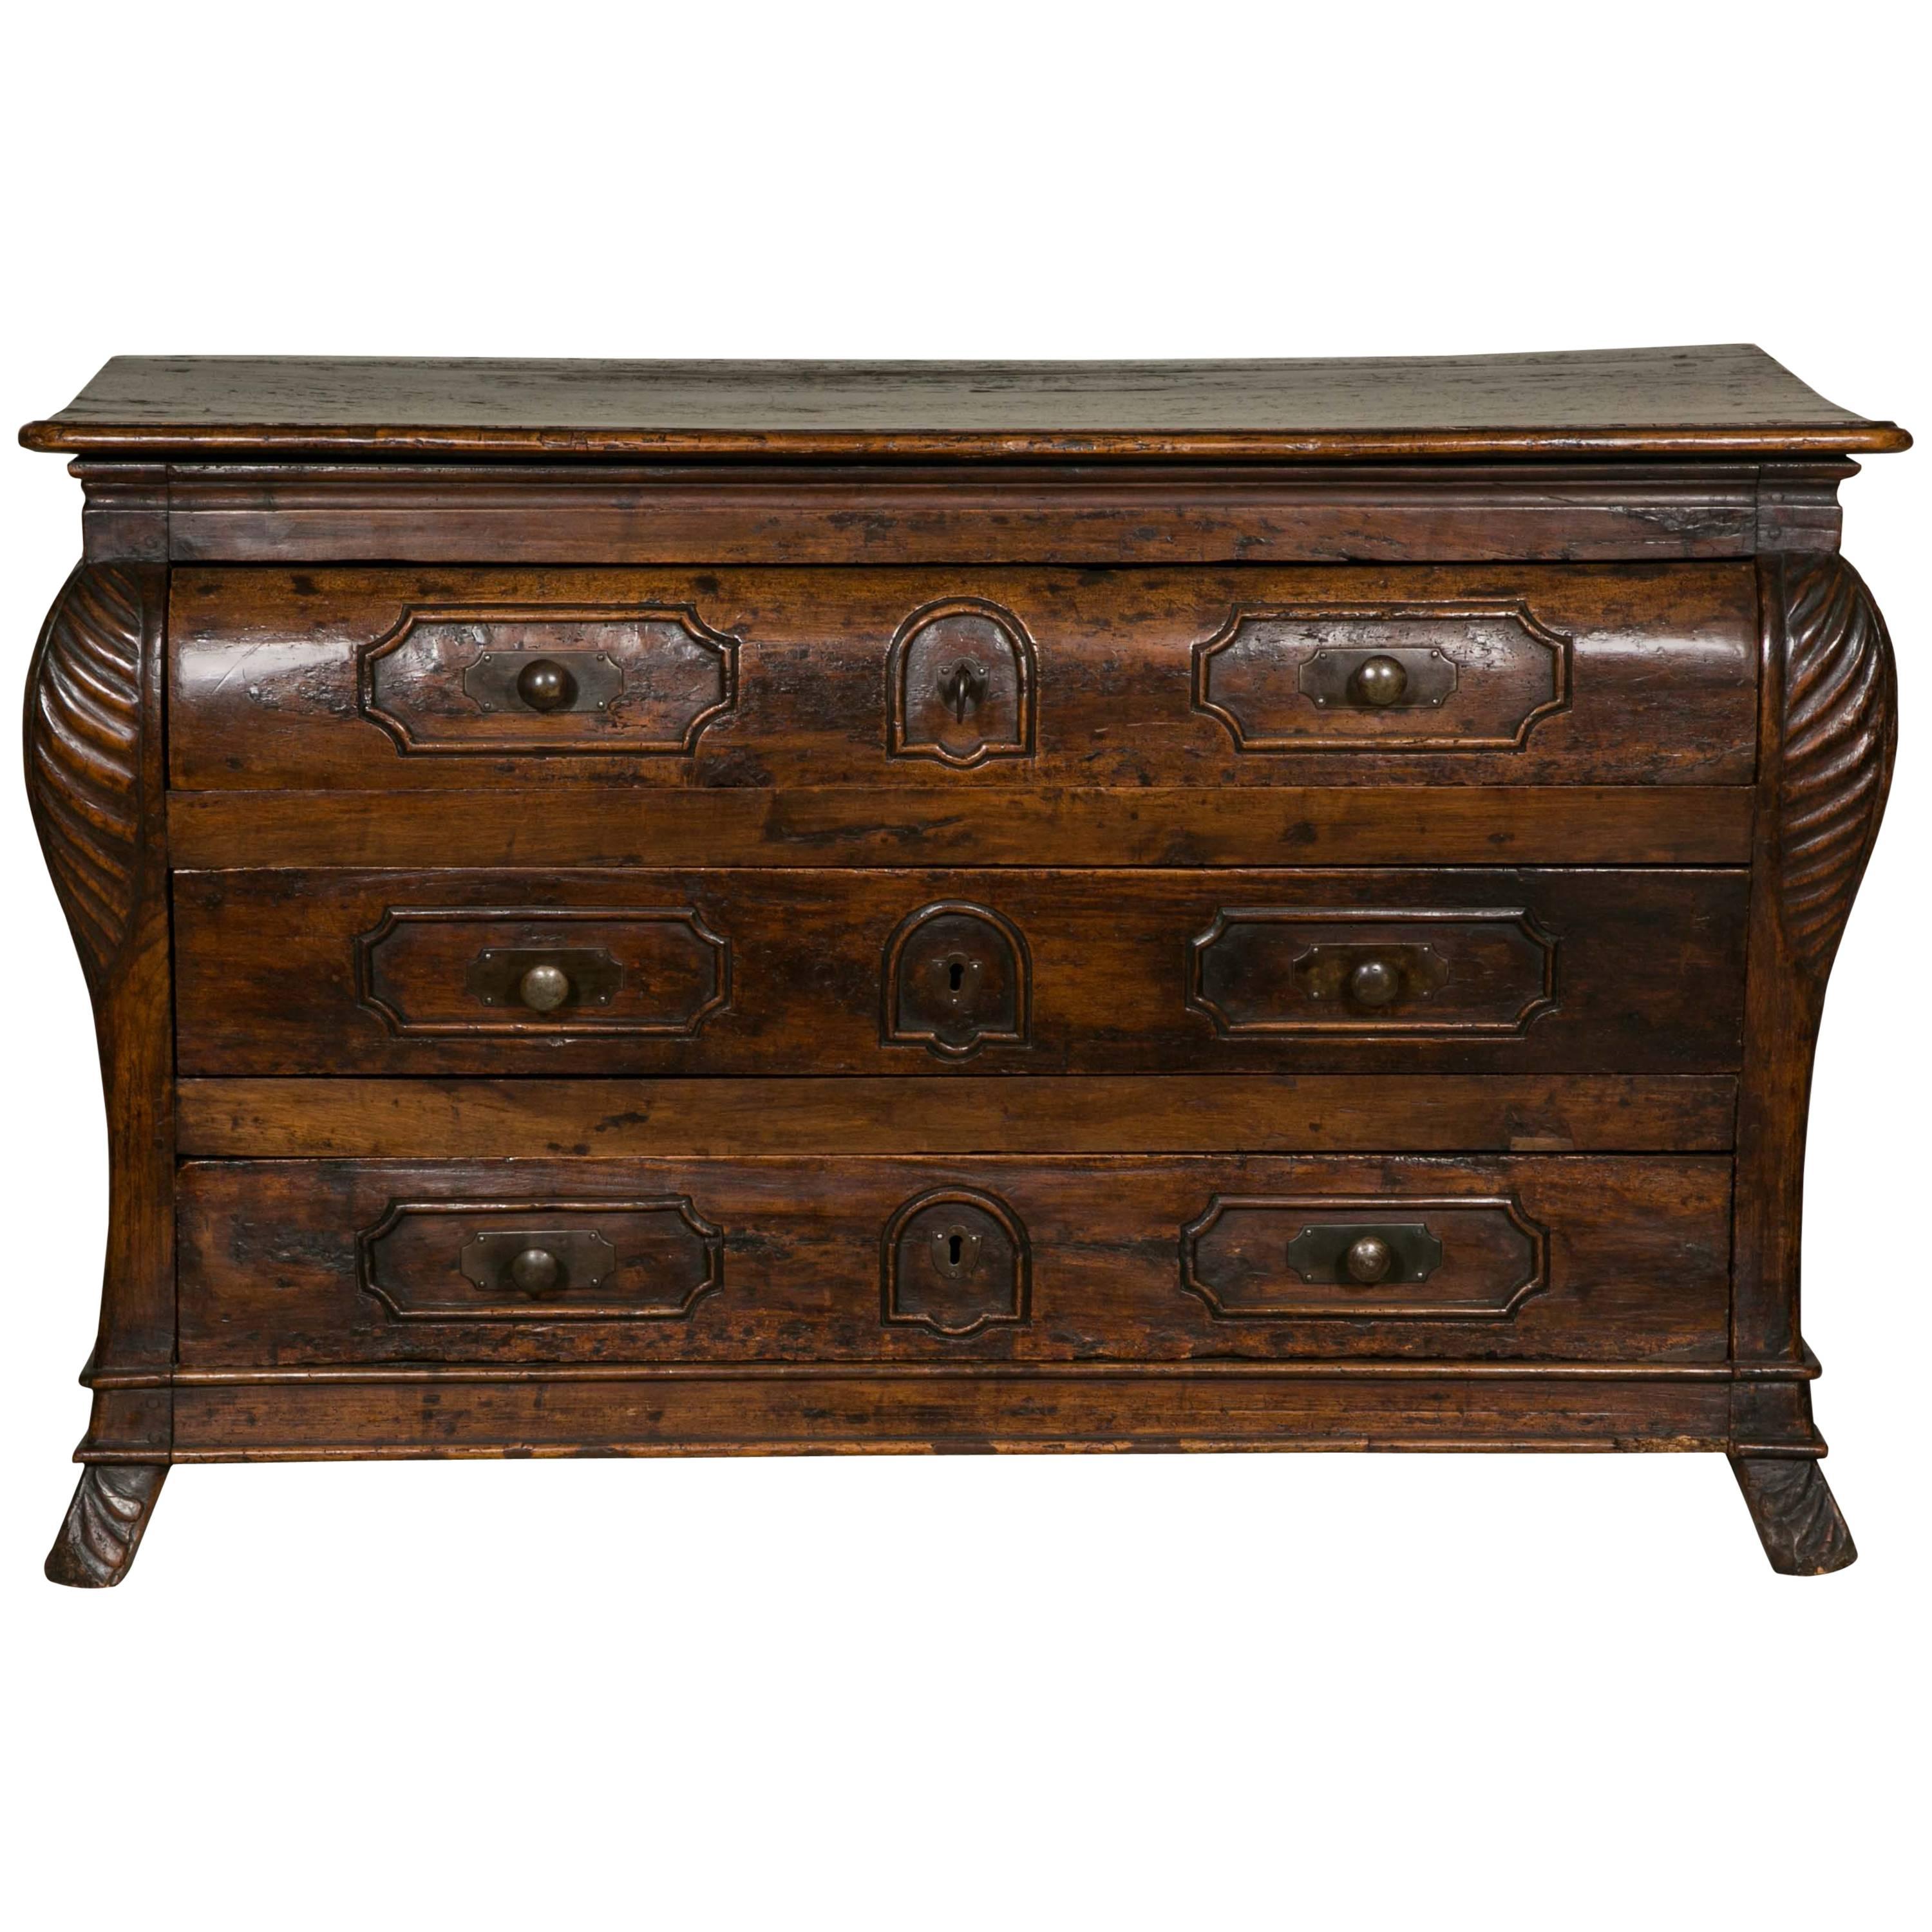 Fabulous Walnut Commode from the 18th Century, Continental, Period Louis XV